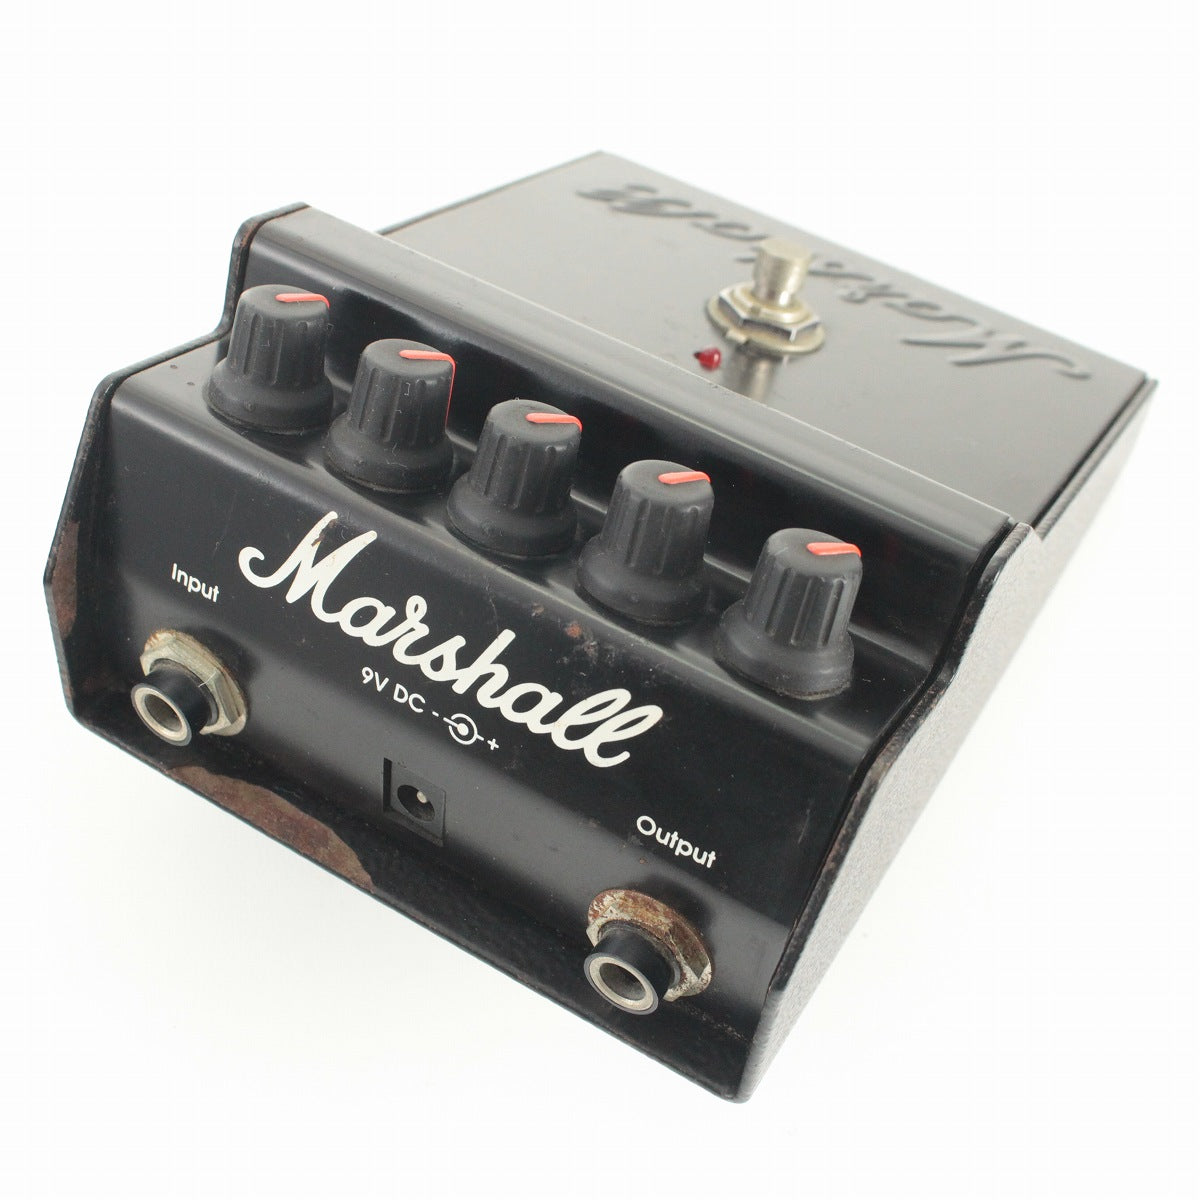 [SN D02160] USED MARSHALL / DRIVE MASTER Mede in England [03]